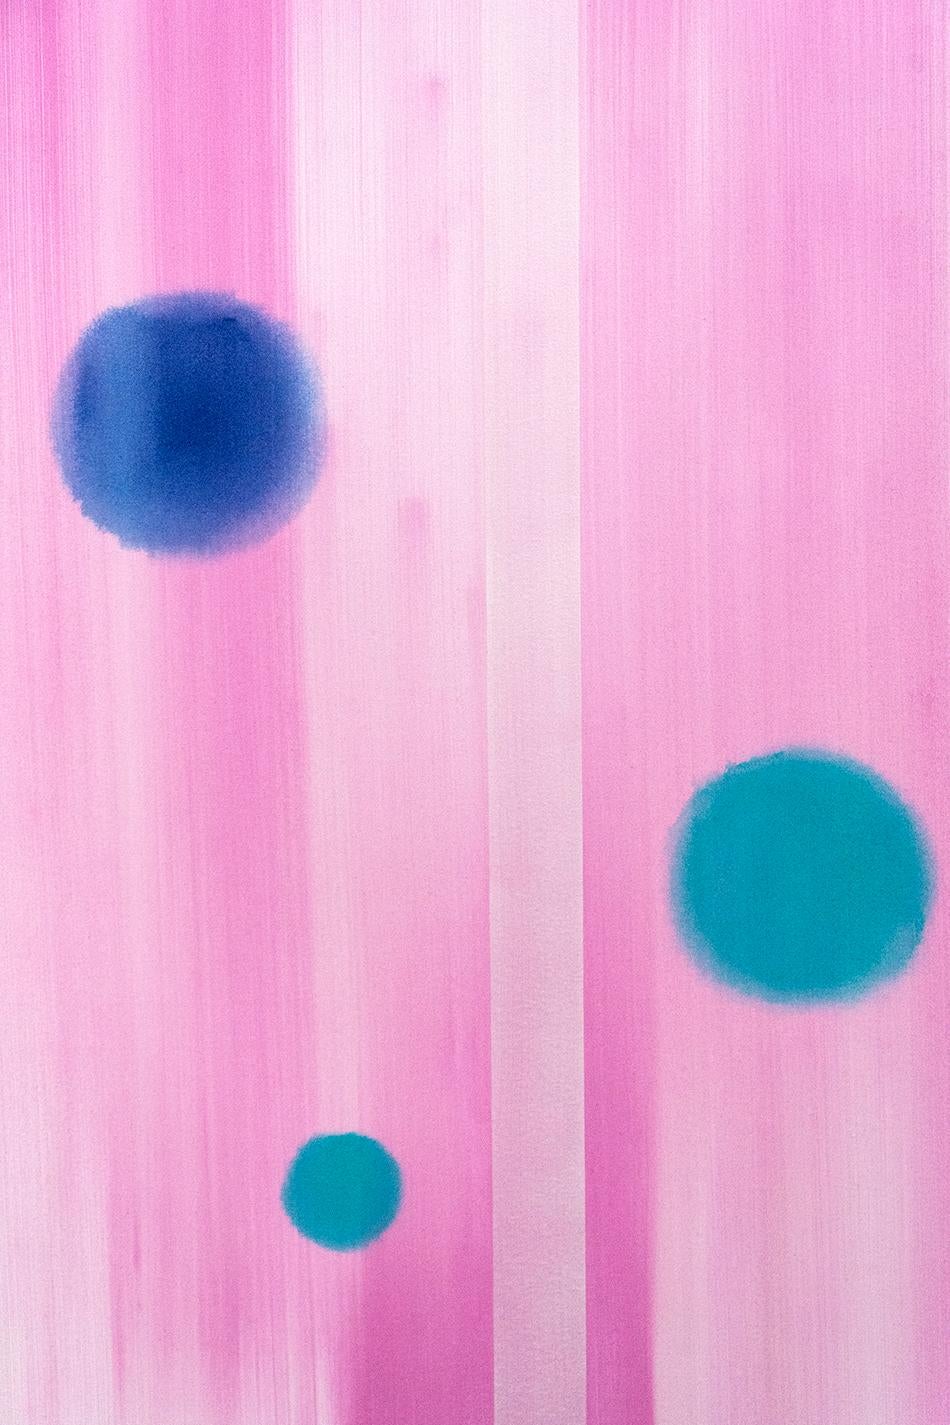 In Other Worlds - pink, navy blue and turquoise abstraction, acrylic on canvas - Contemporary Painting by Milly Ristvedt